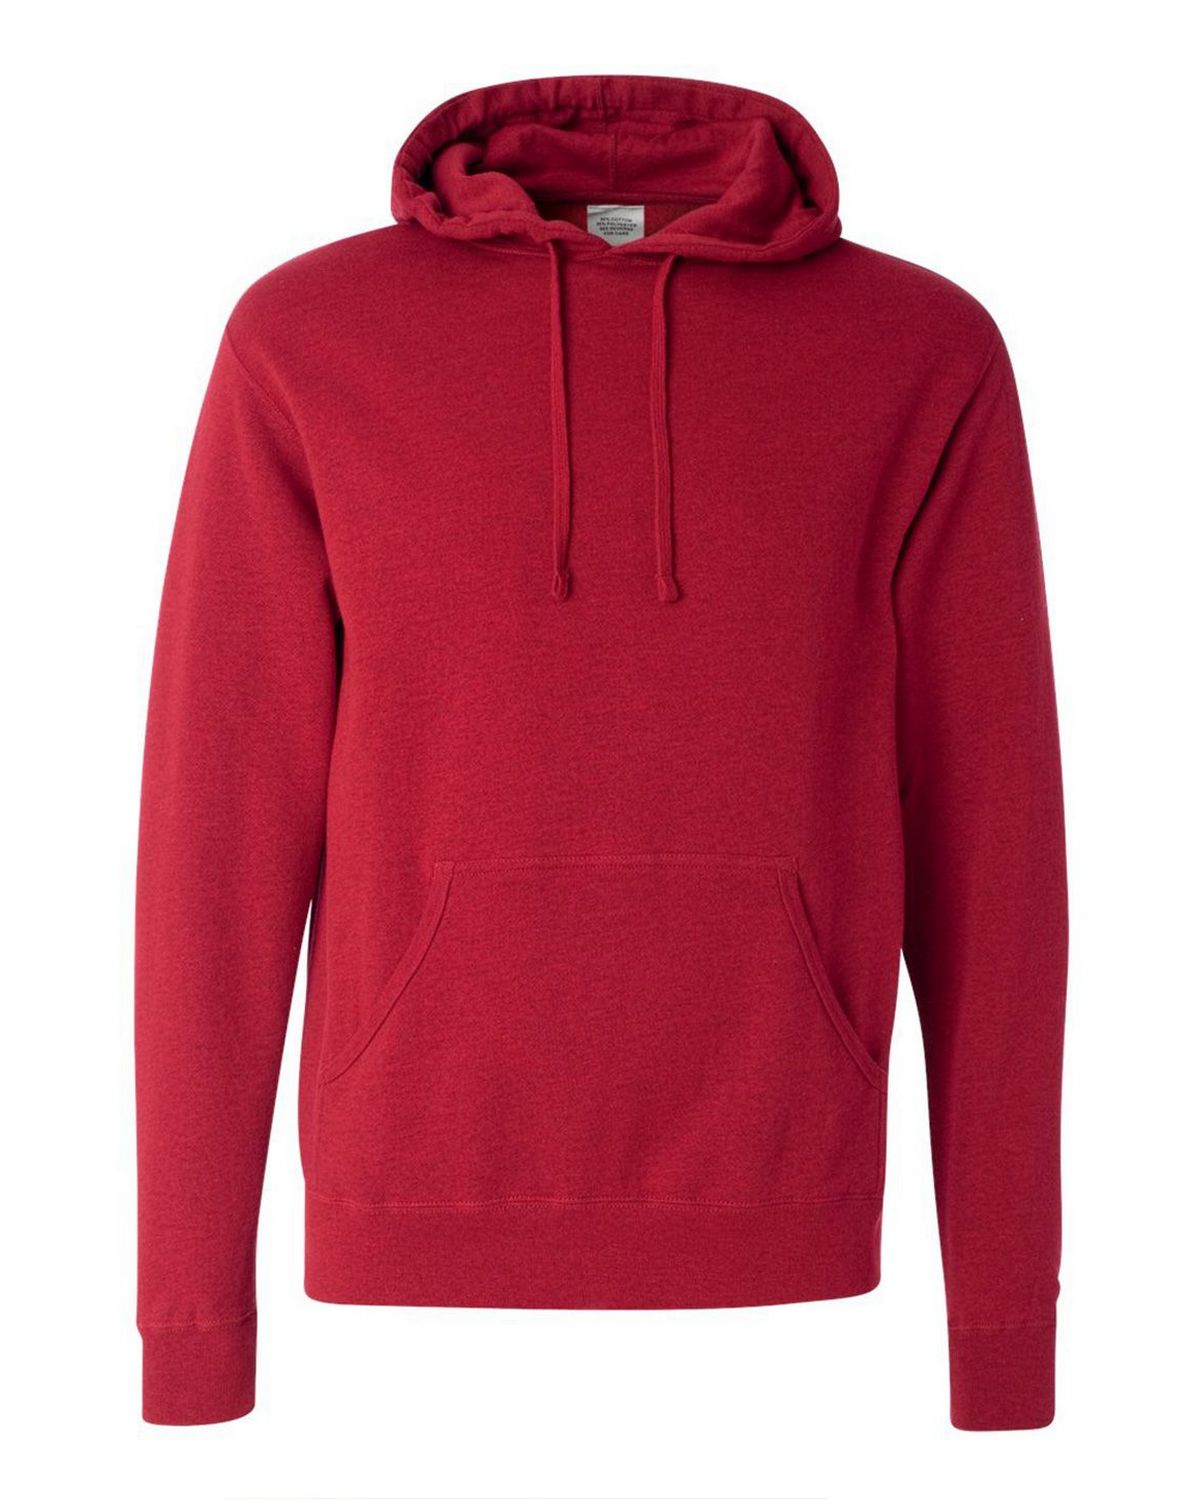 Download Independent Trading Co. AFX4000 Mens Hooded Pullover ...